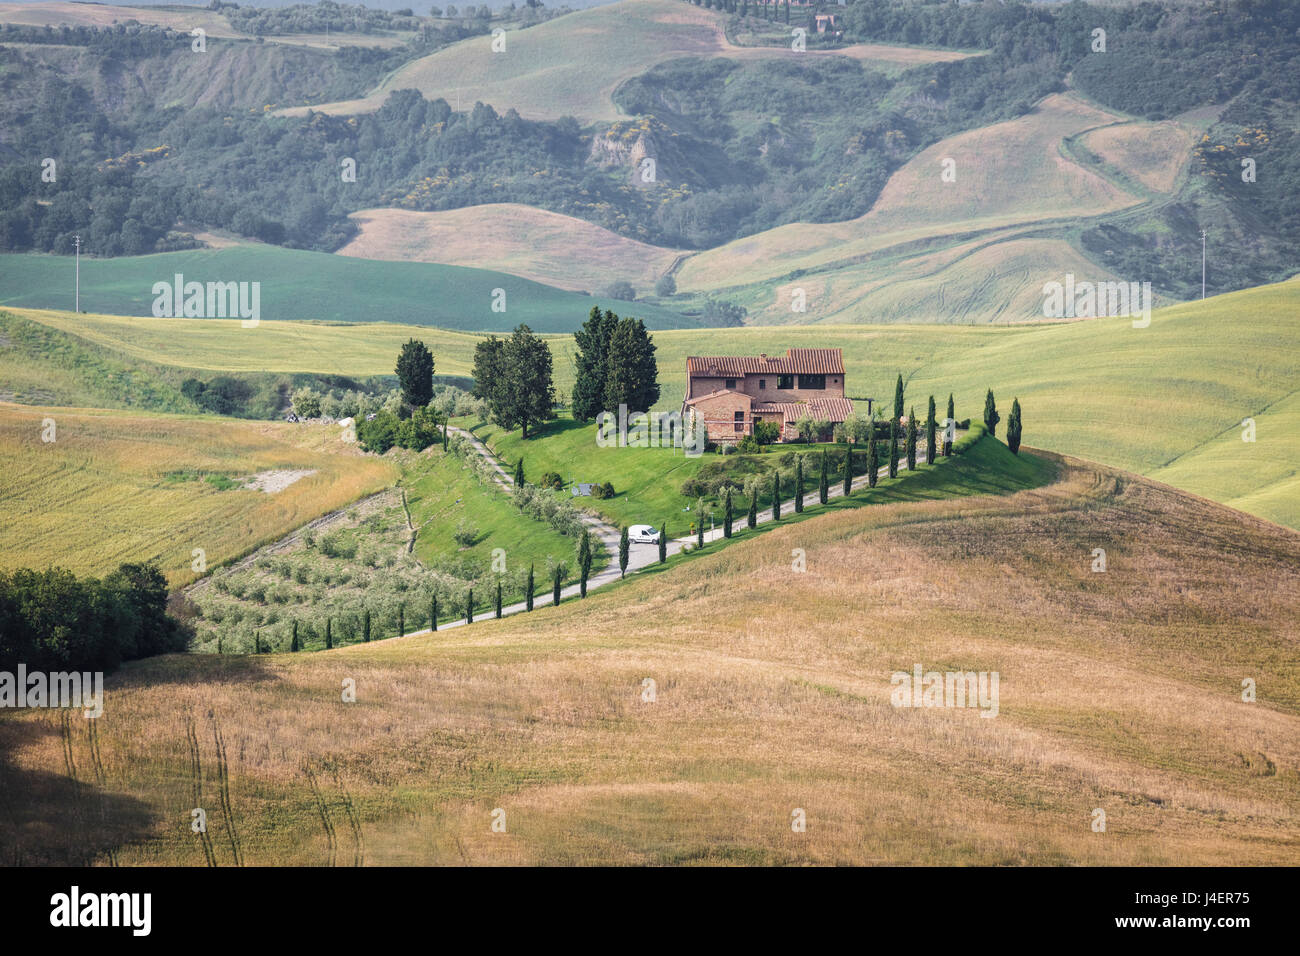 Green rolling hills and farm houses of Crete Senesi (Senese Clays), Province of Siena, Tuscany, Italy, Europe Stock Photo